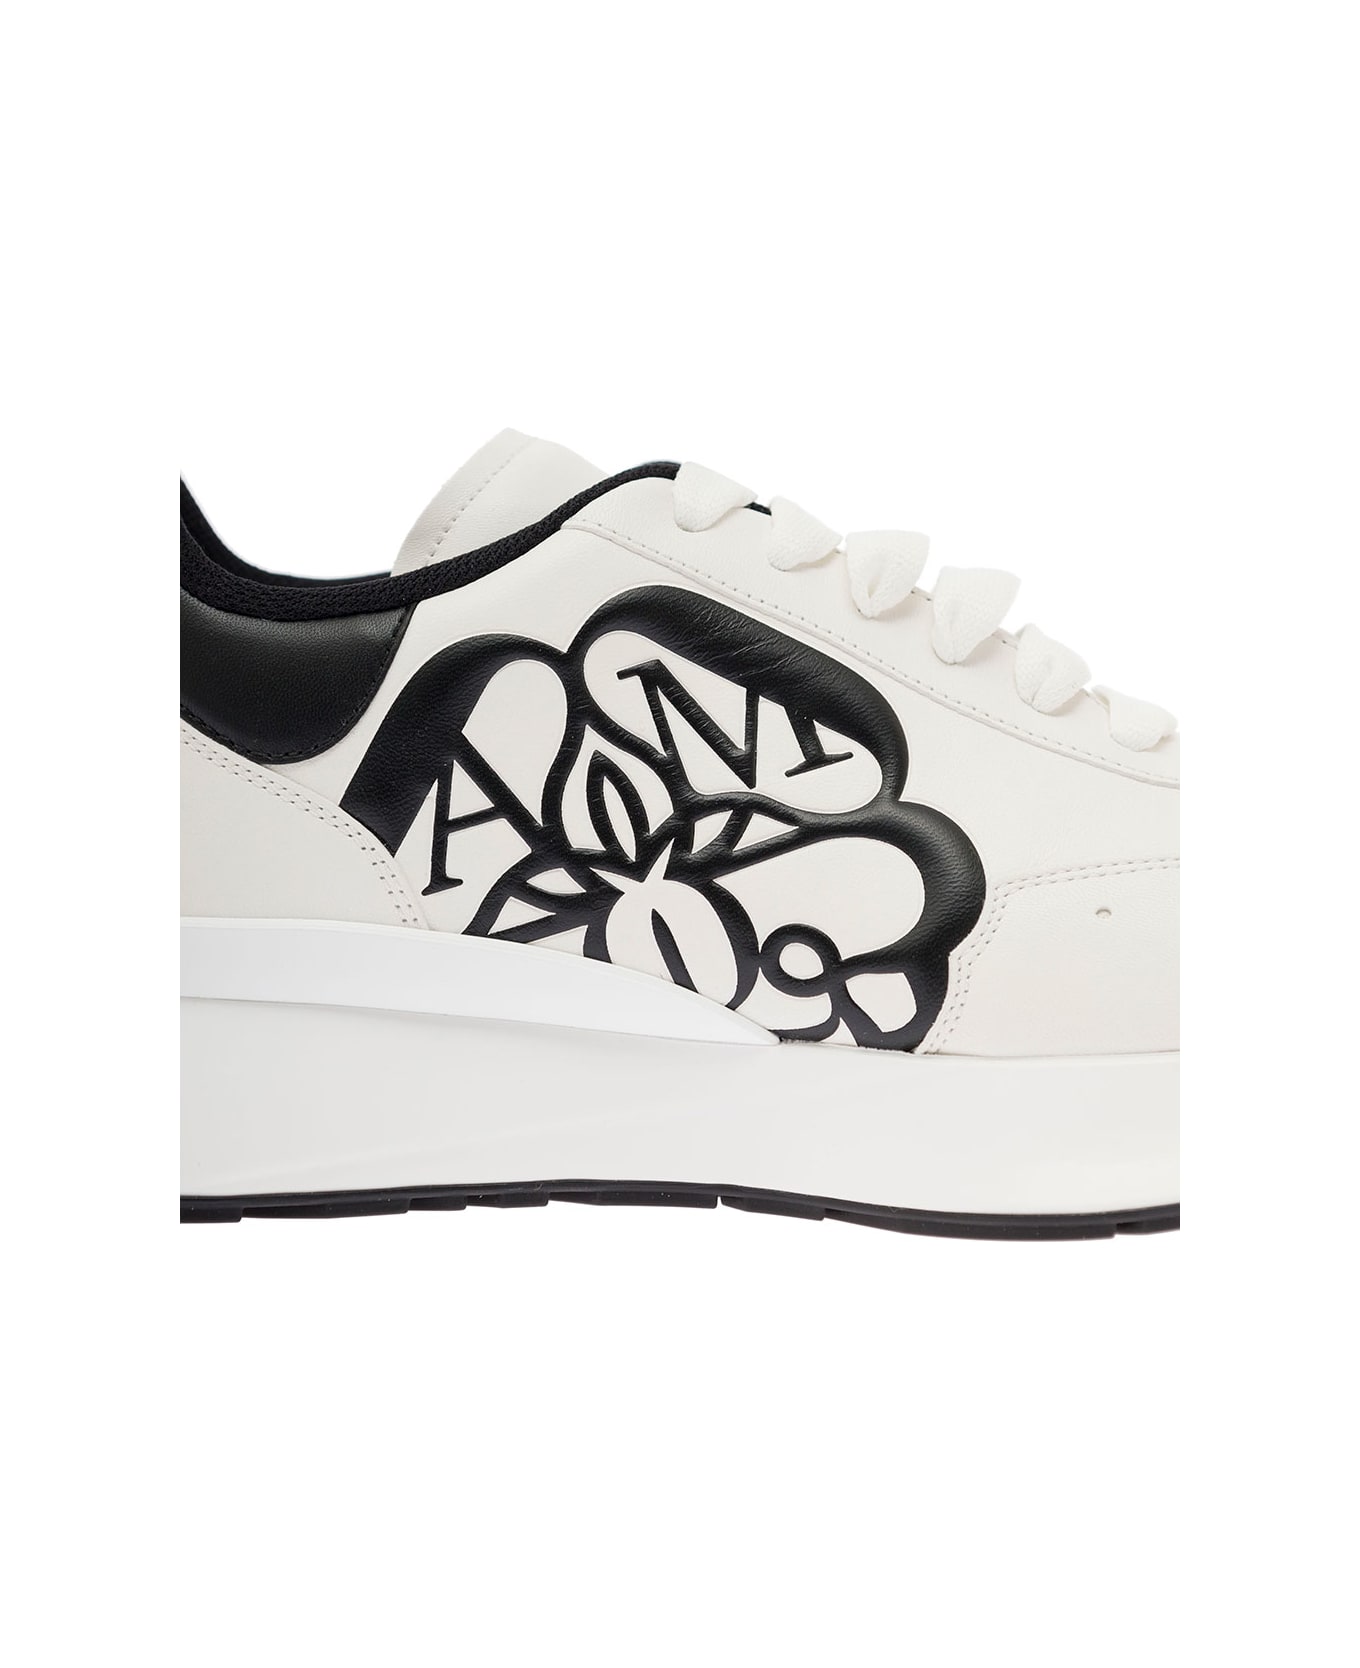 Alexander McQueen Man's White And Black Leather Sneakers - White